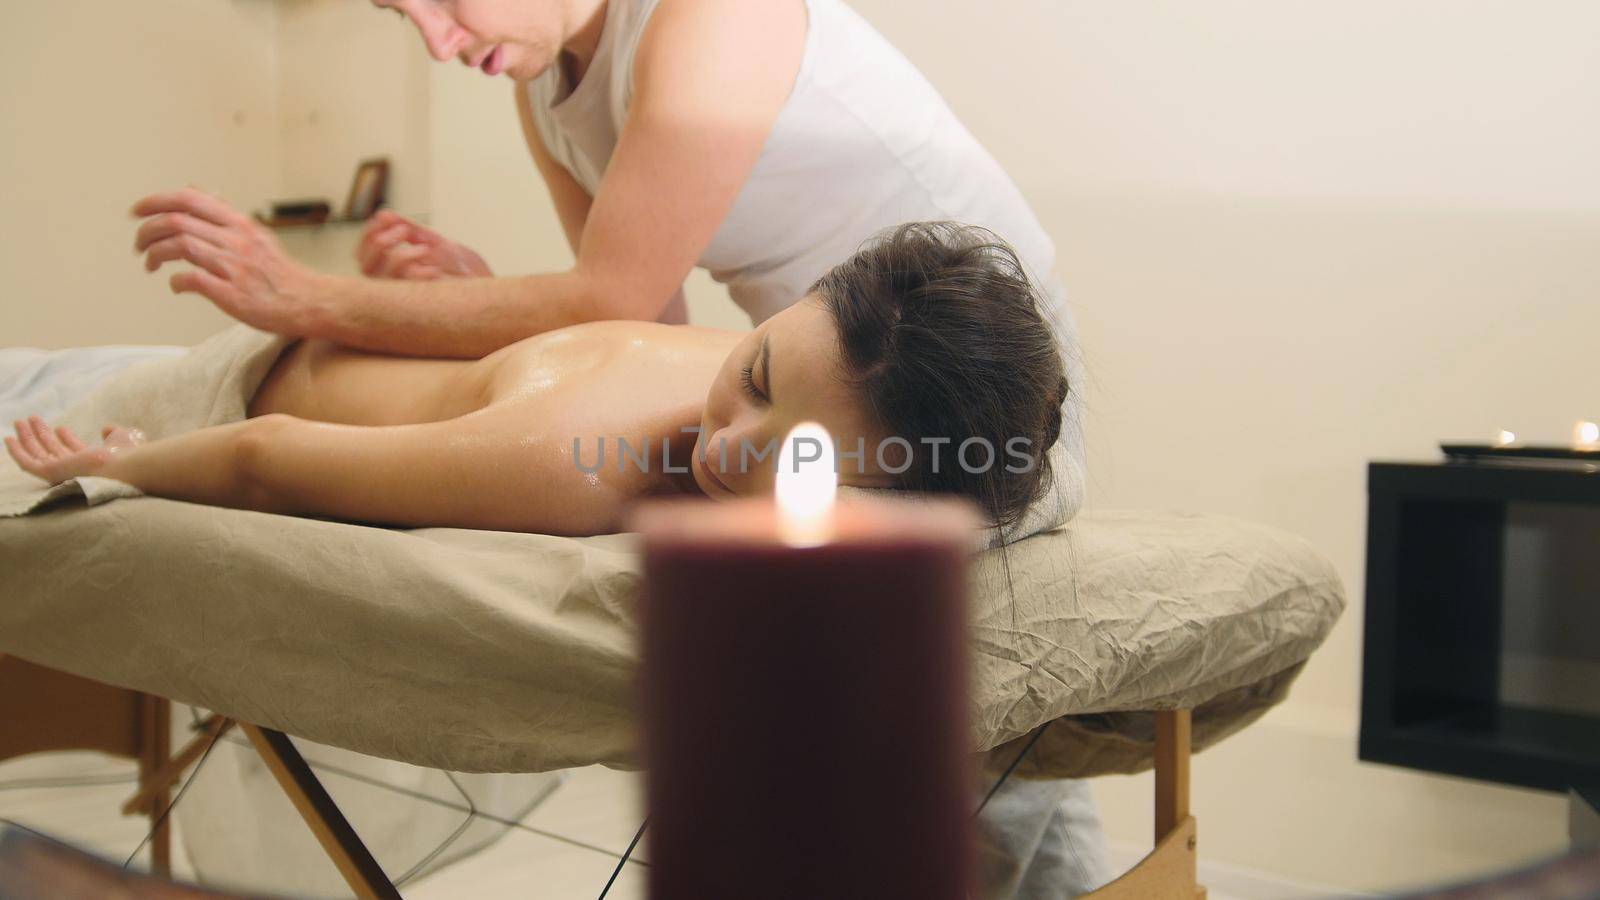 Massage parlor - man doing relaxing therapy for a young girl, candle in room, close up